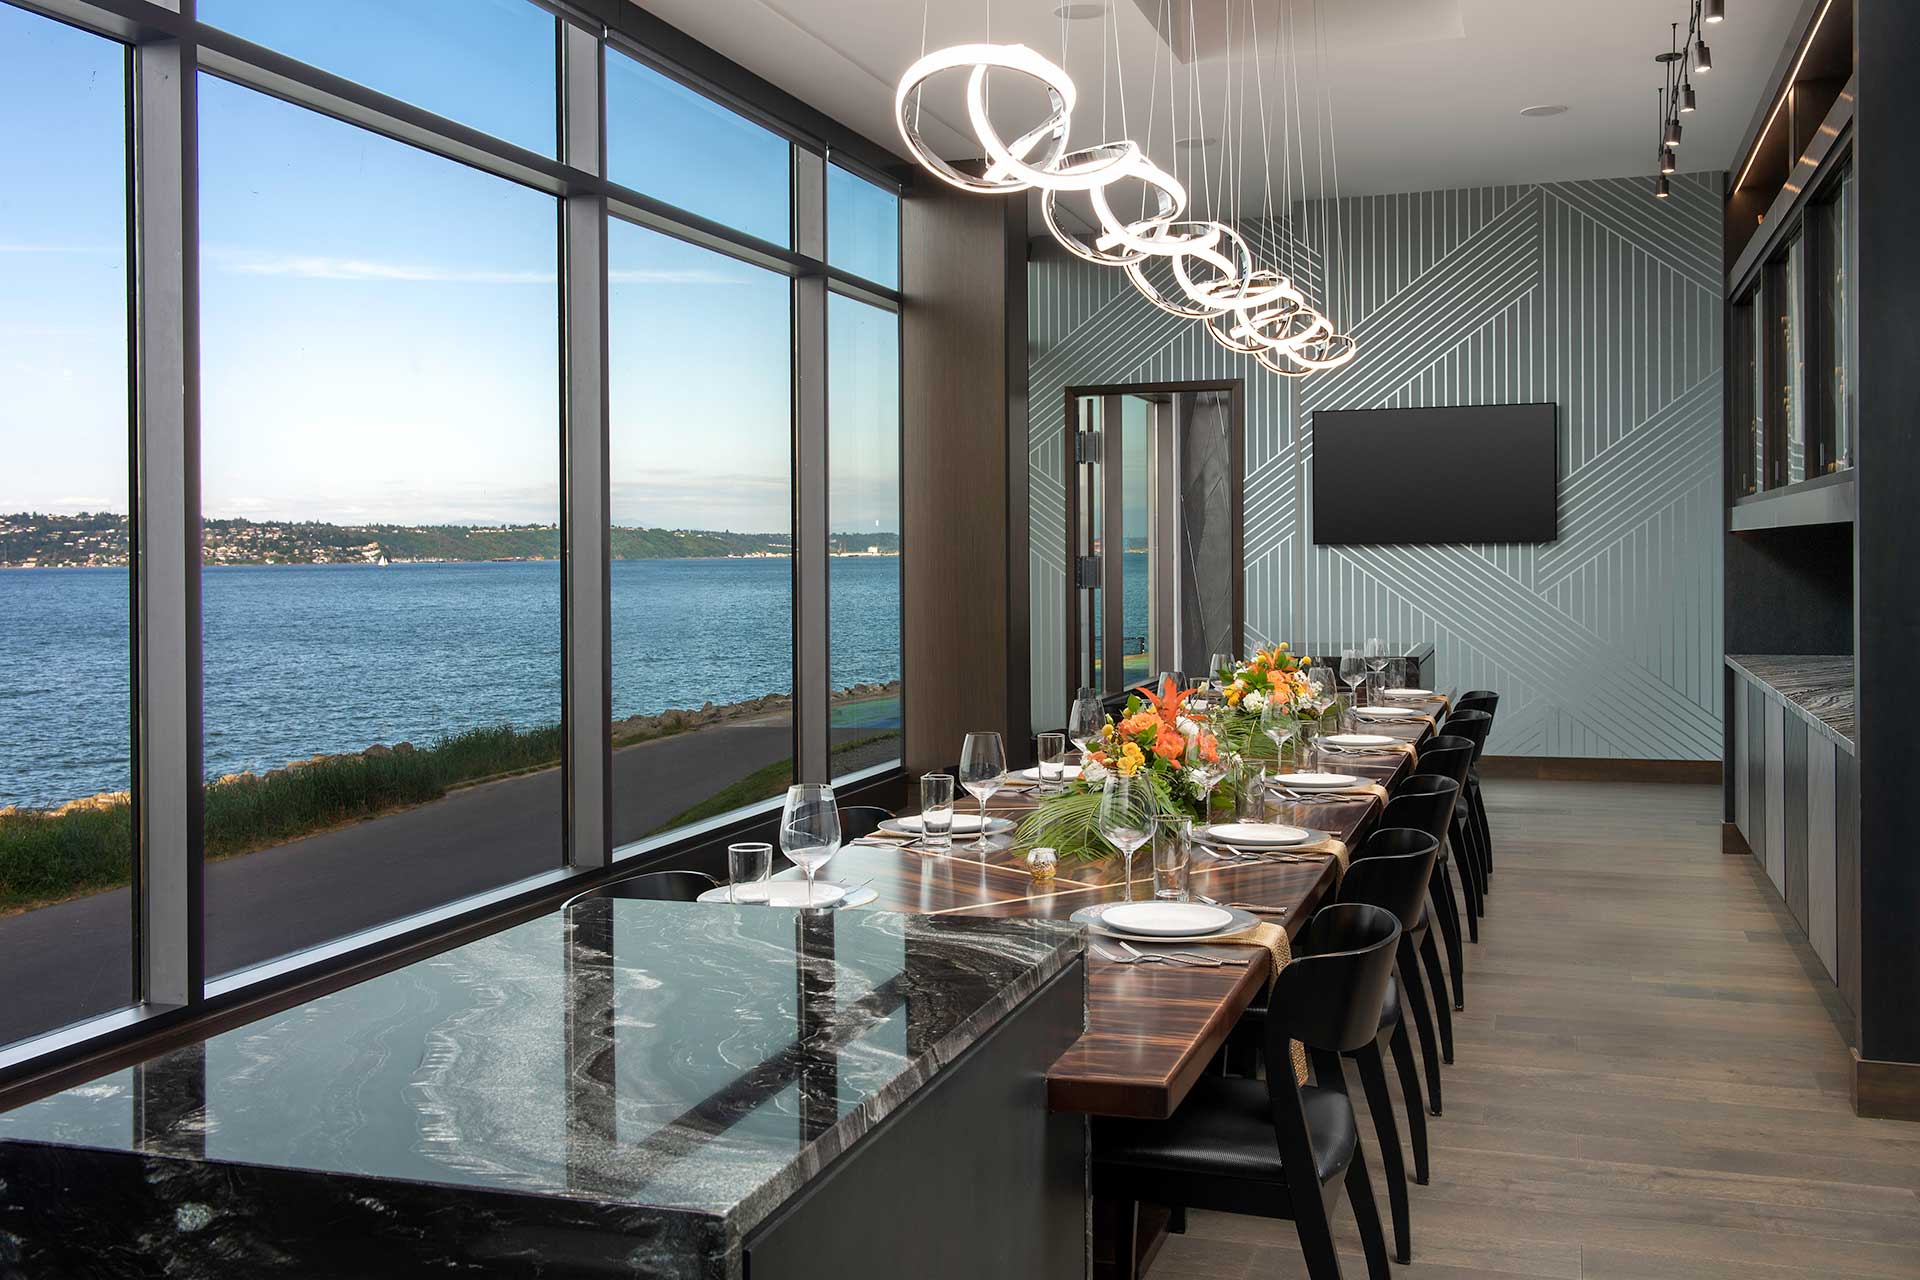 Private dining room with a view of the water at Copper and Salt Northwest Kitchen.